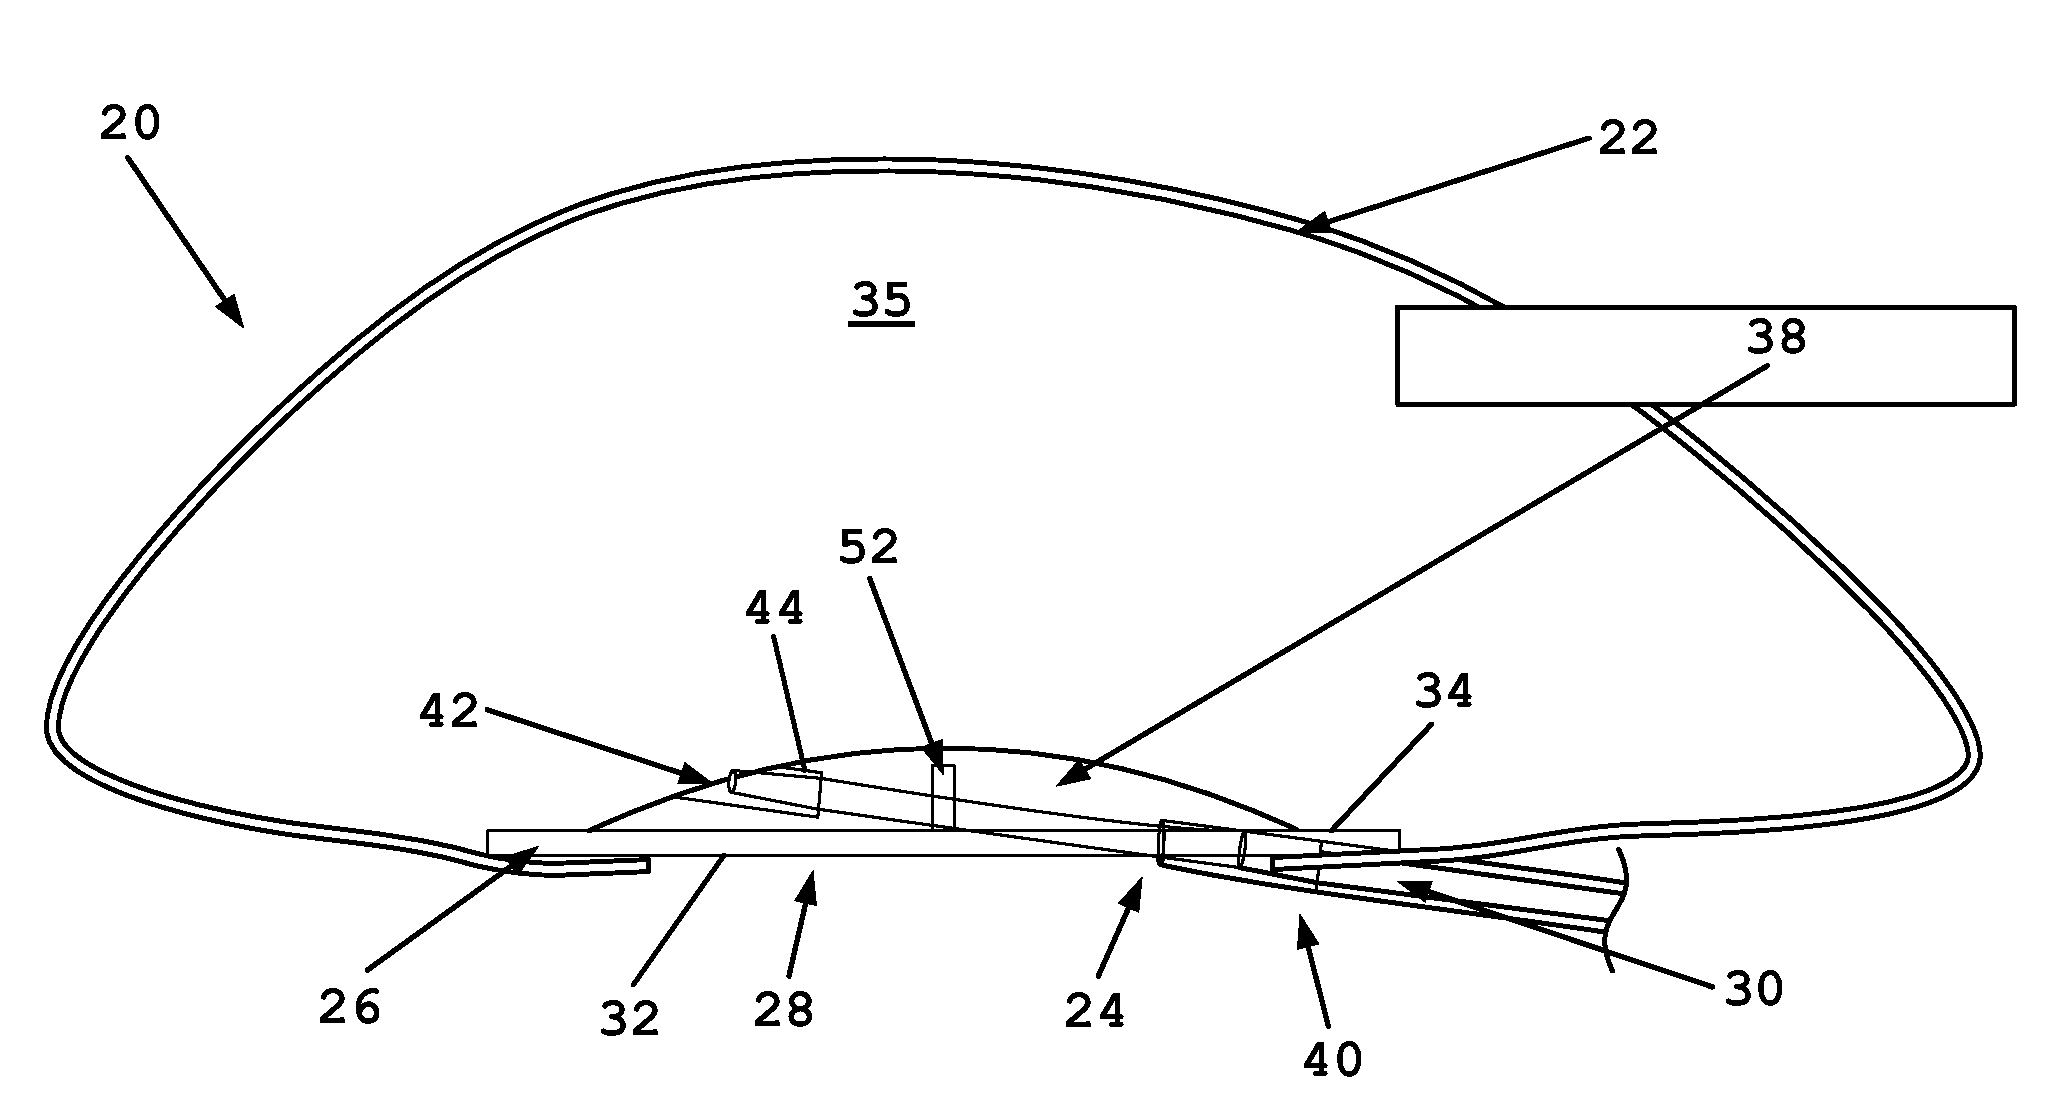 Valve assemblies for expandable implants and tissue expanders